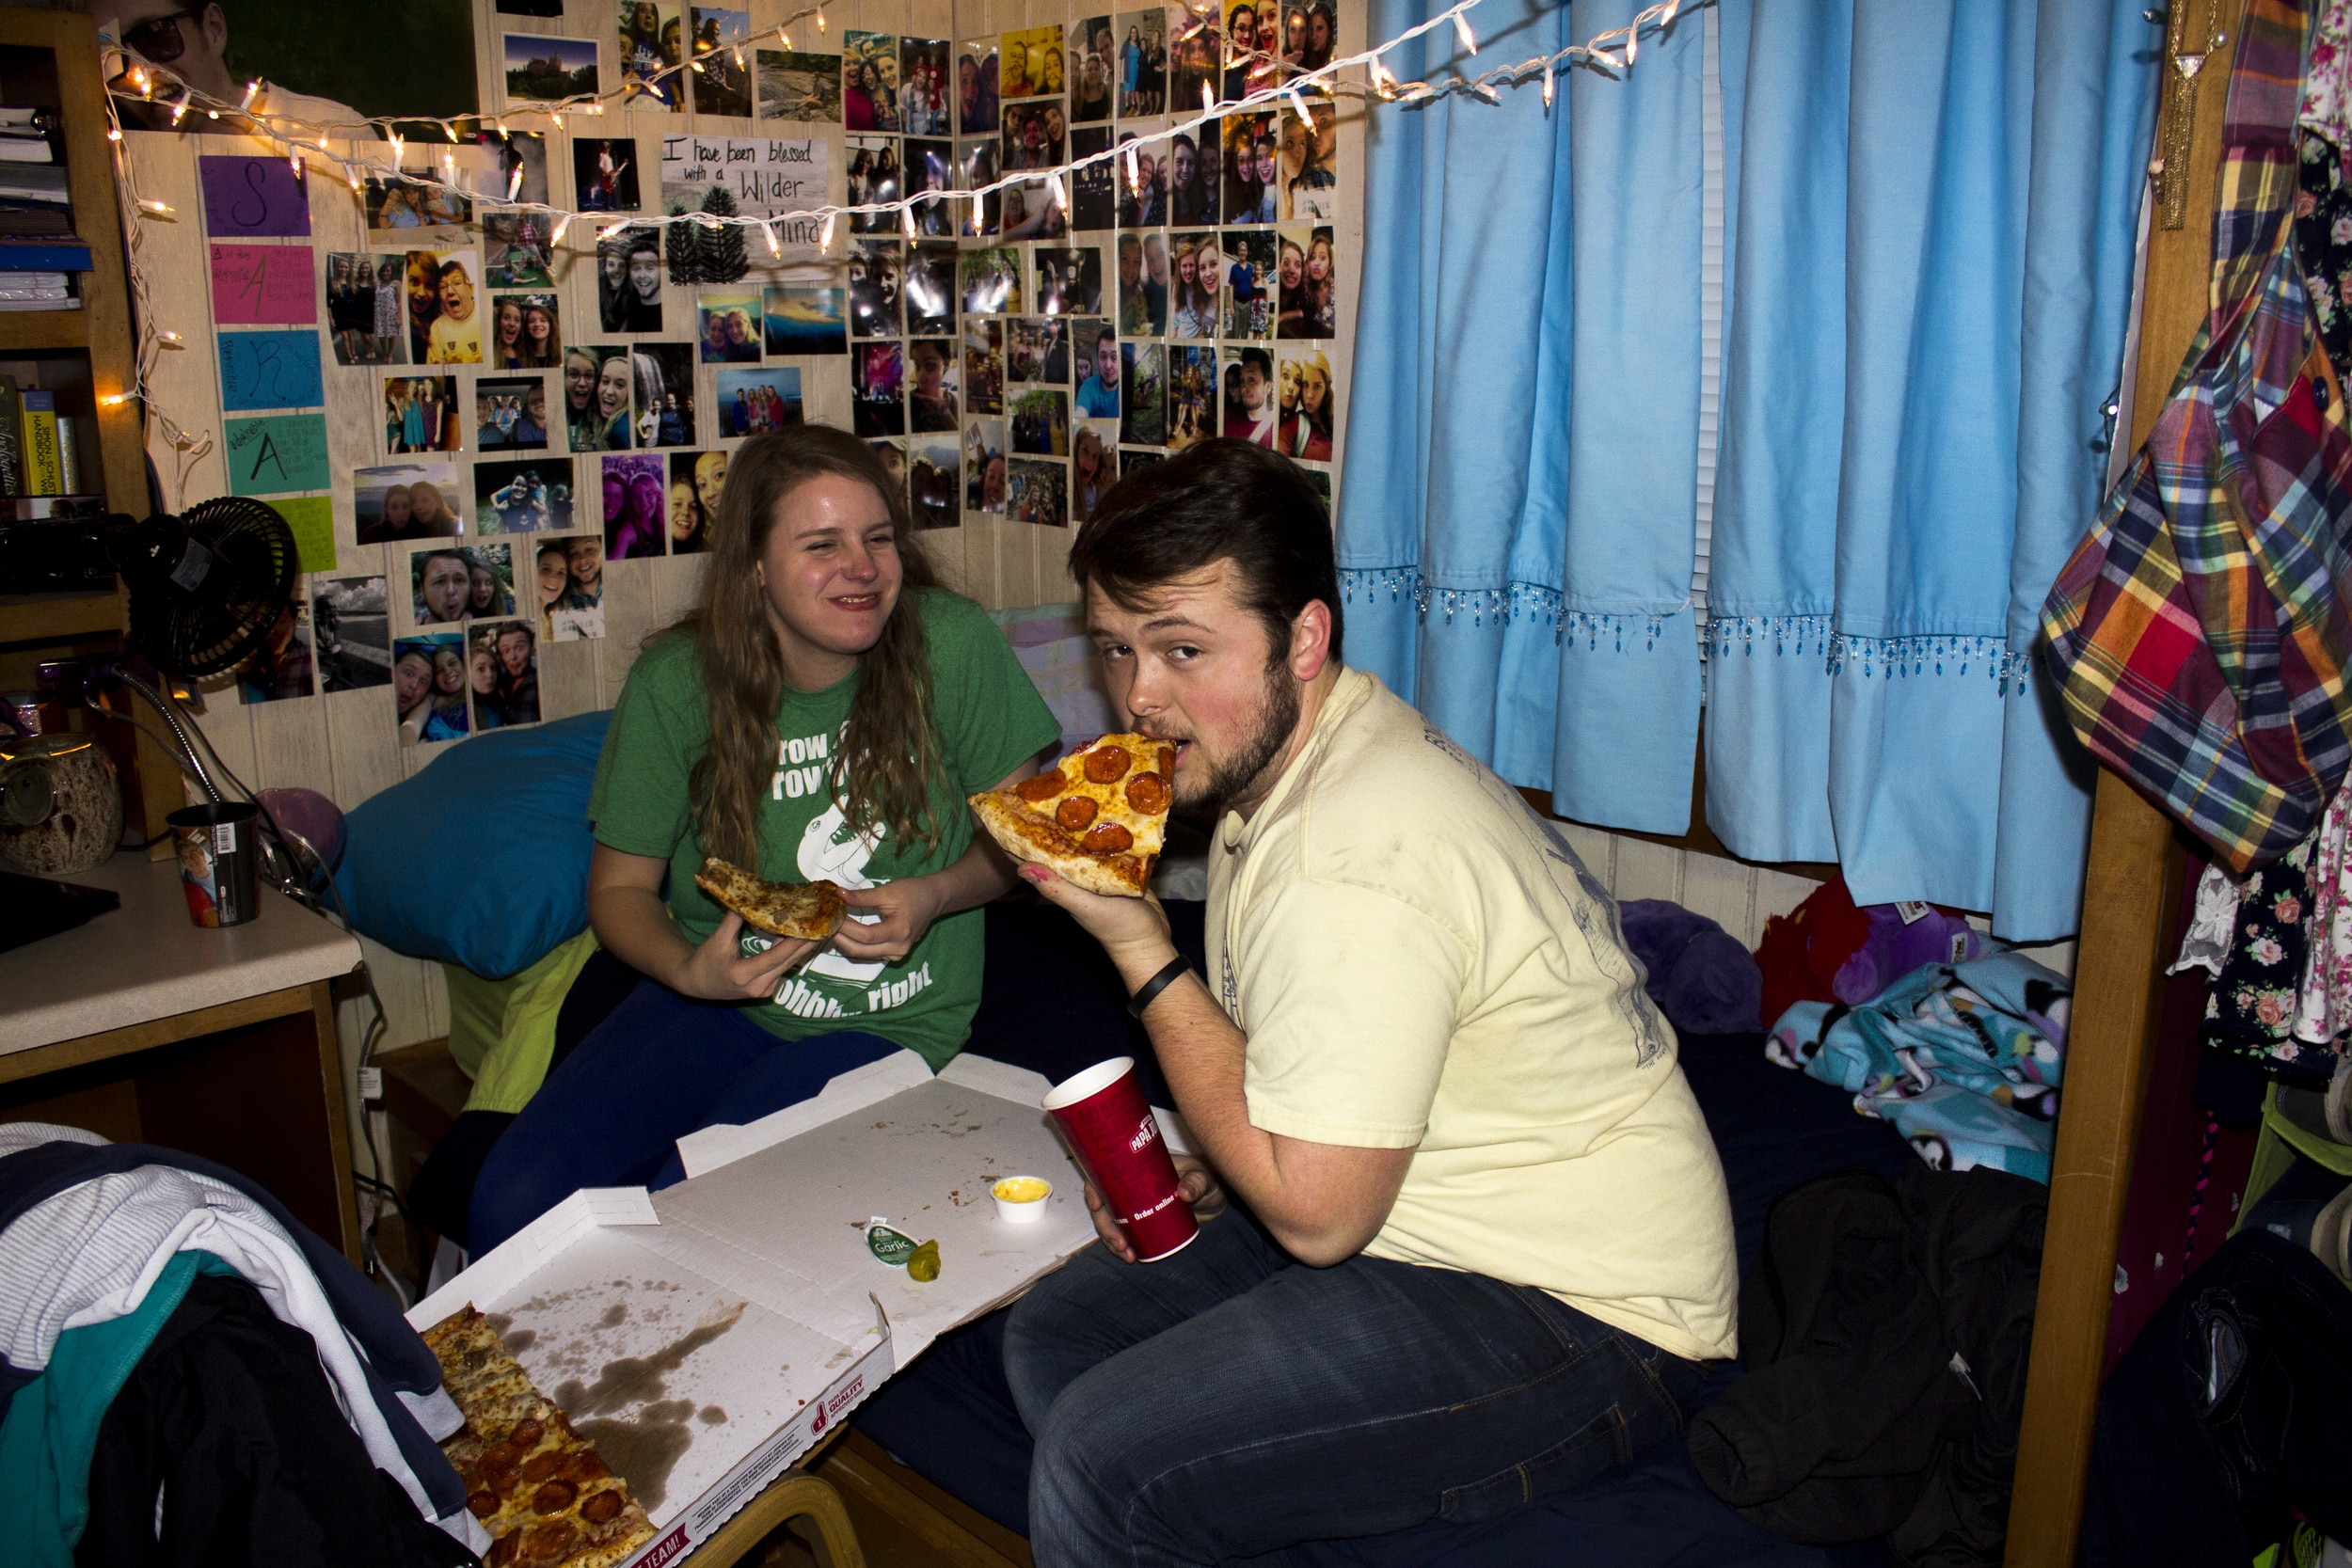  Sarah Wells and Aaron Crowell enjoy the chance to catch a pizza date during open dorms.&nbsp; 